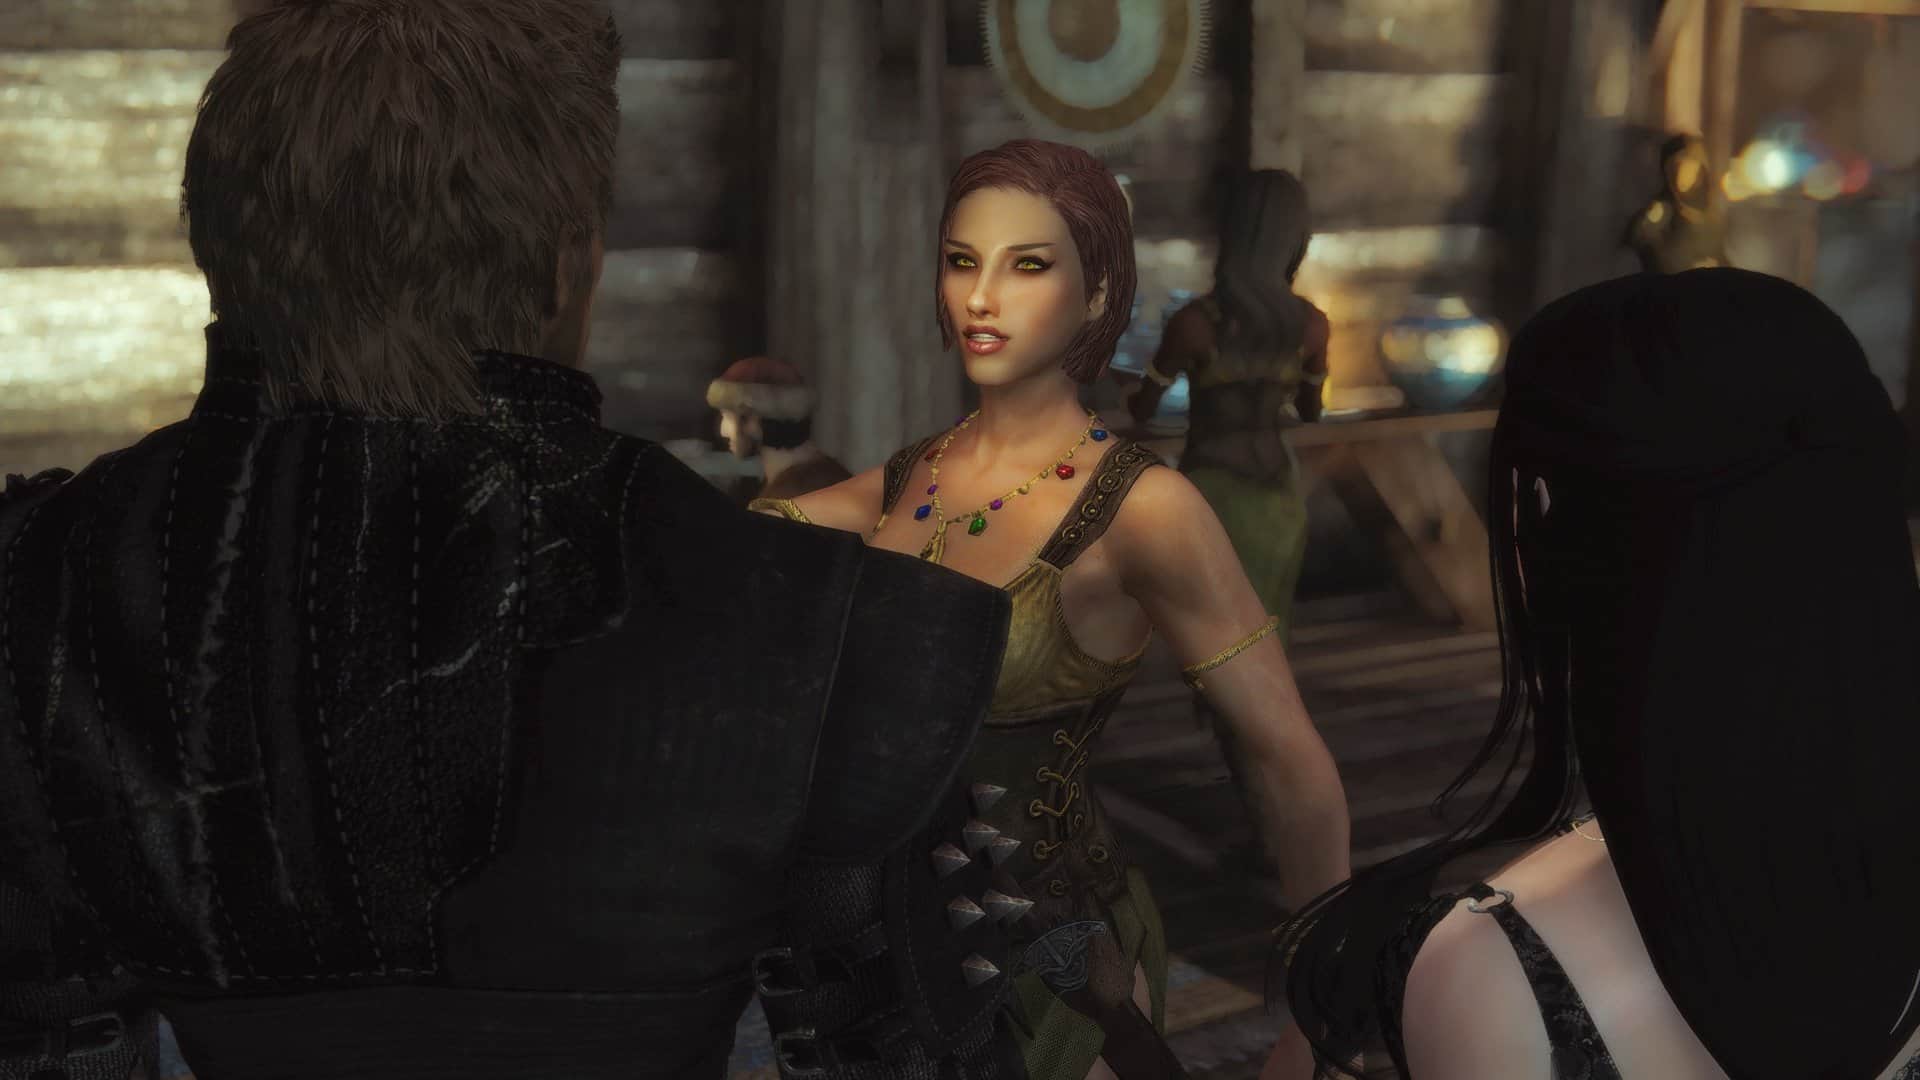 The Skyrim Romance Mod Incident What You Need To Know